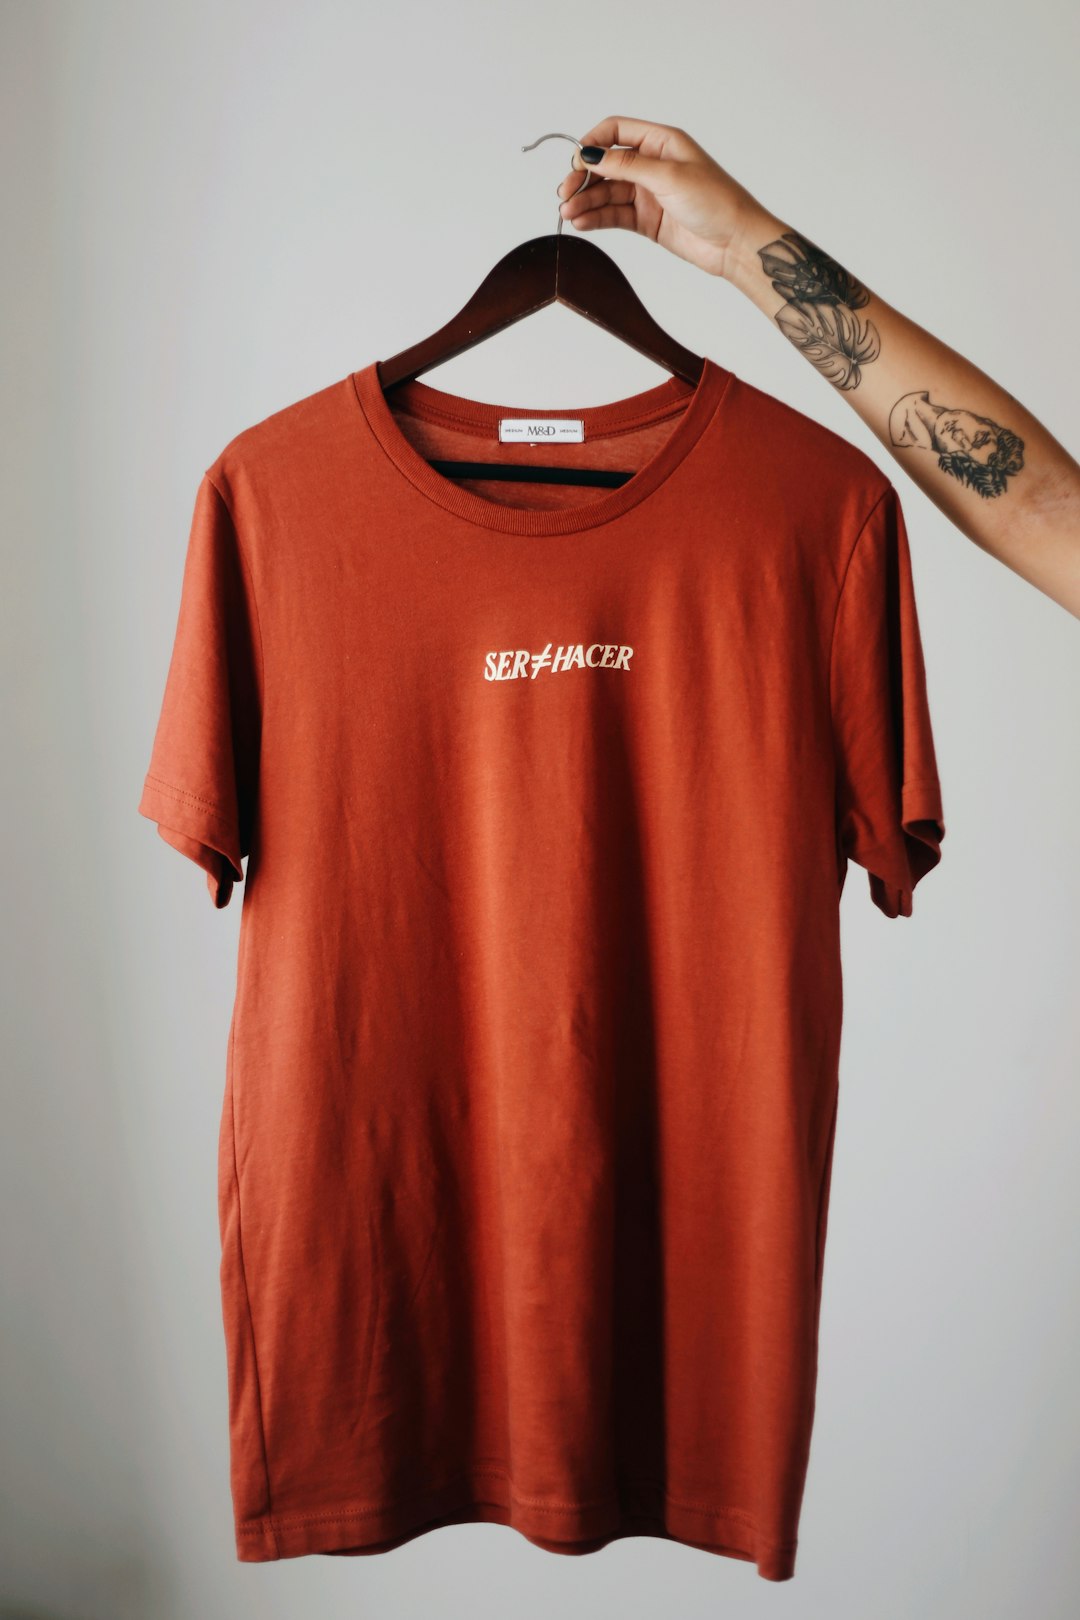 red crew neck t-shirt